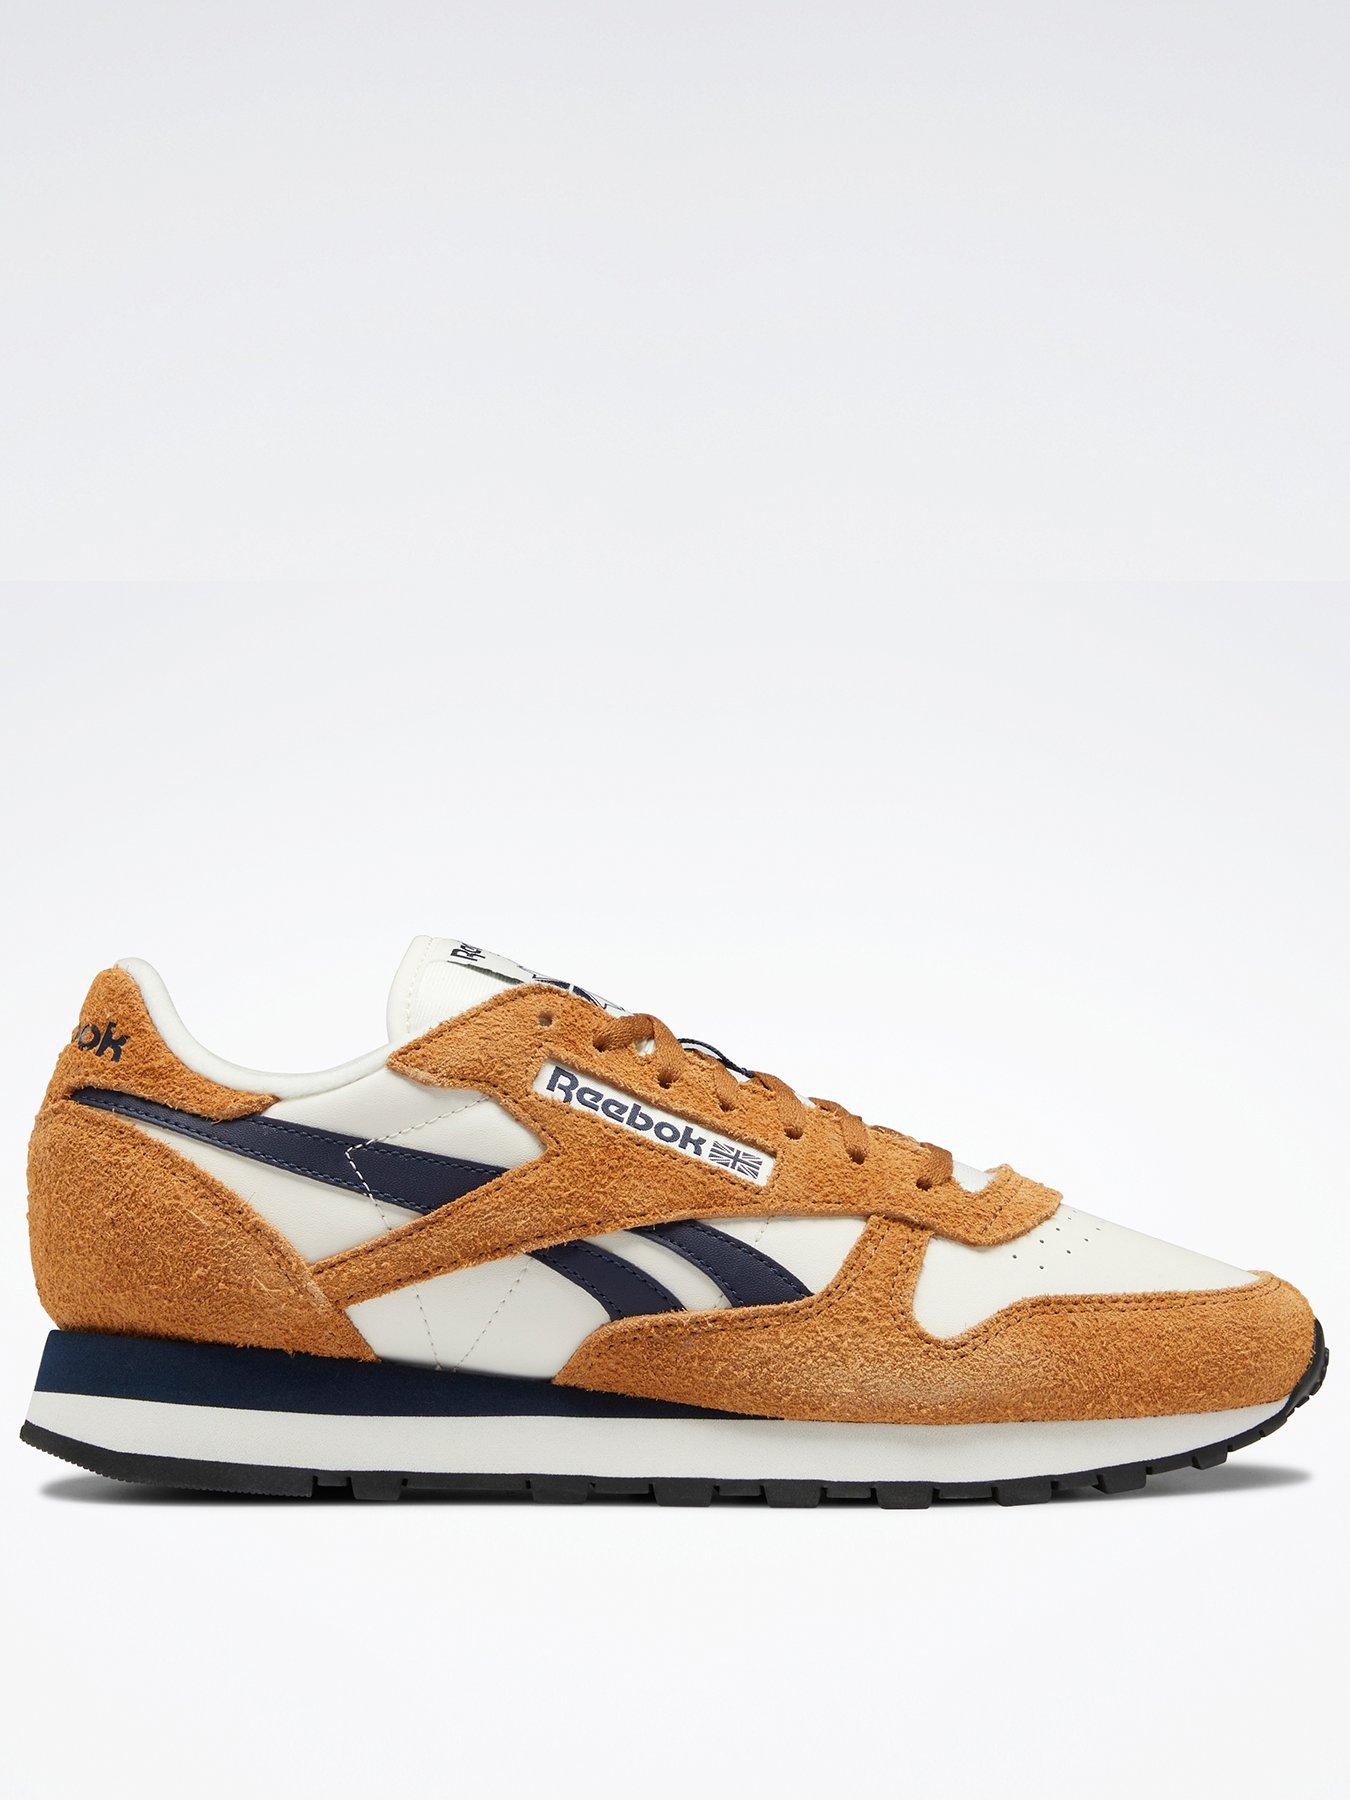 Reebok Classic Leather Shoes | very.co.uk